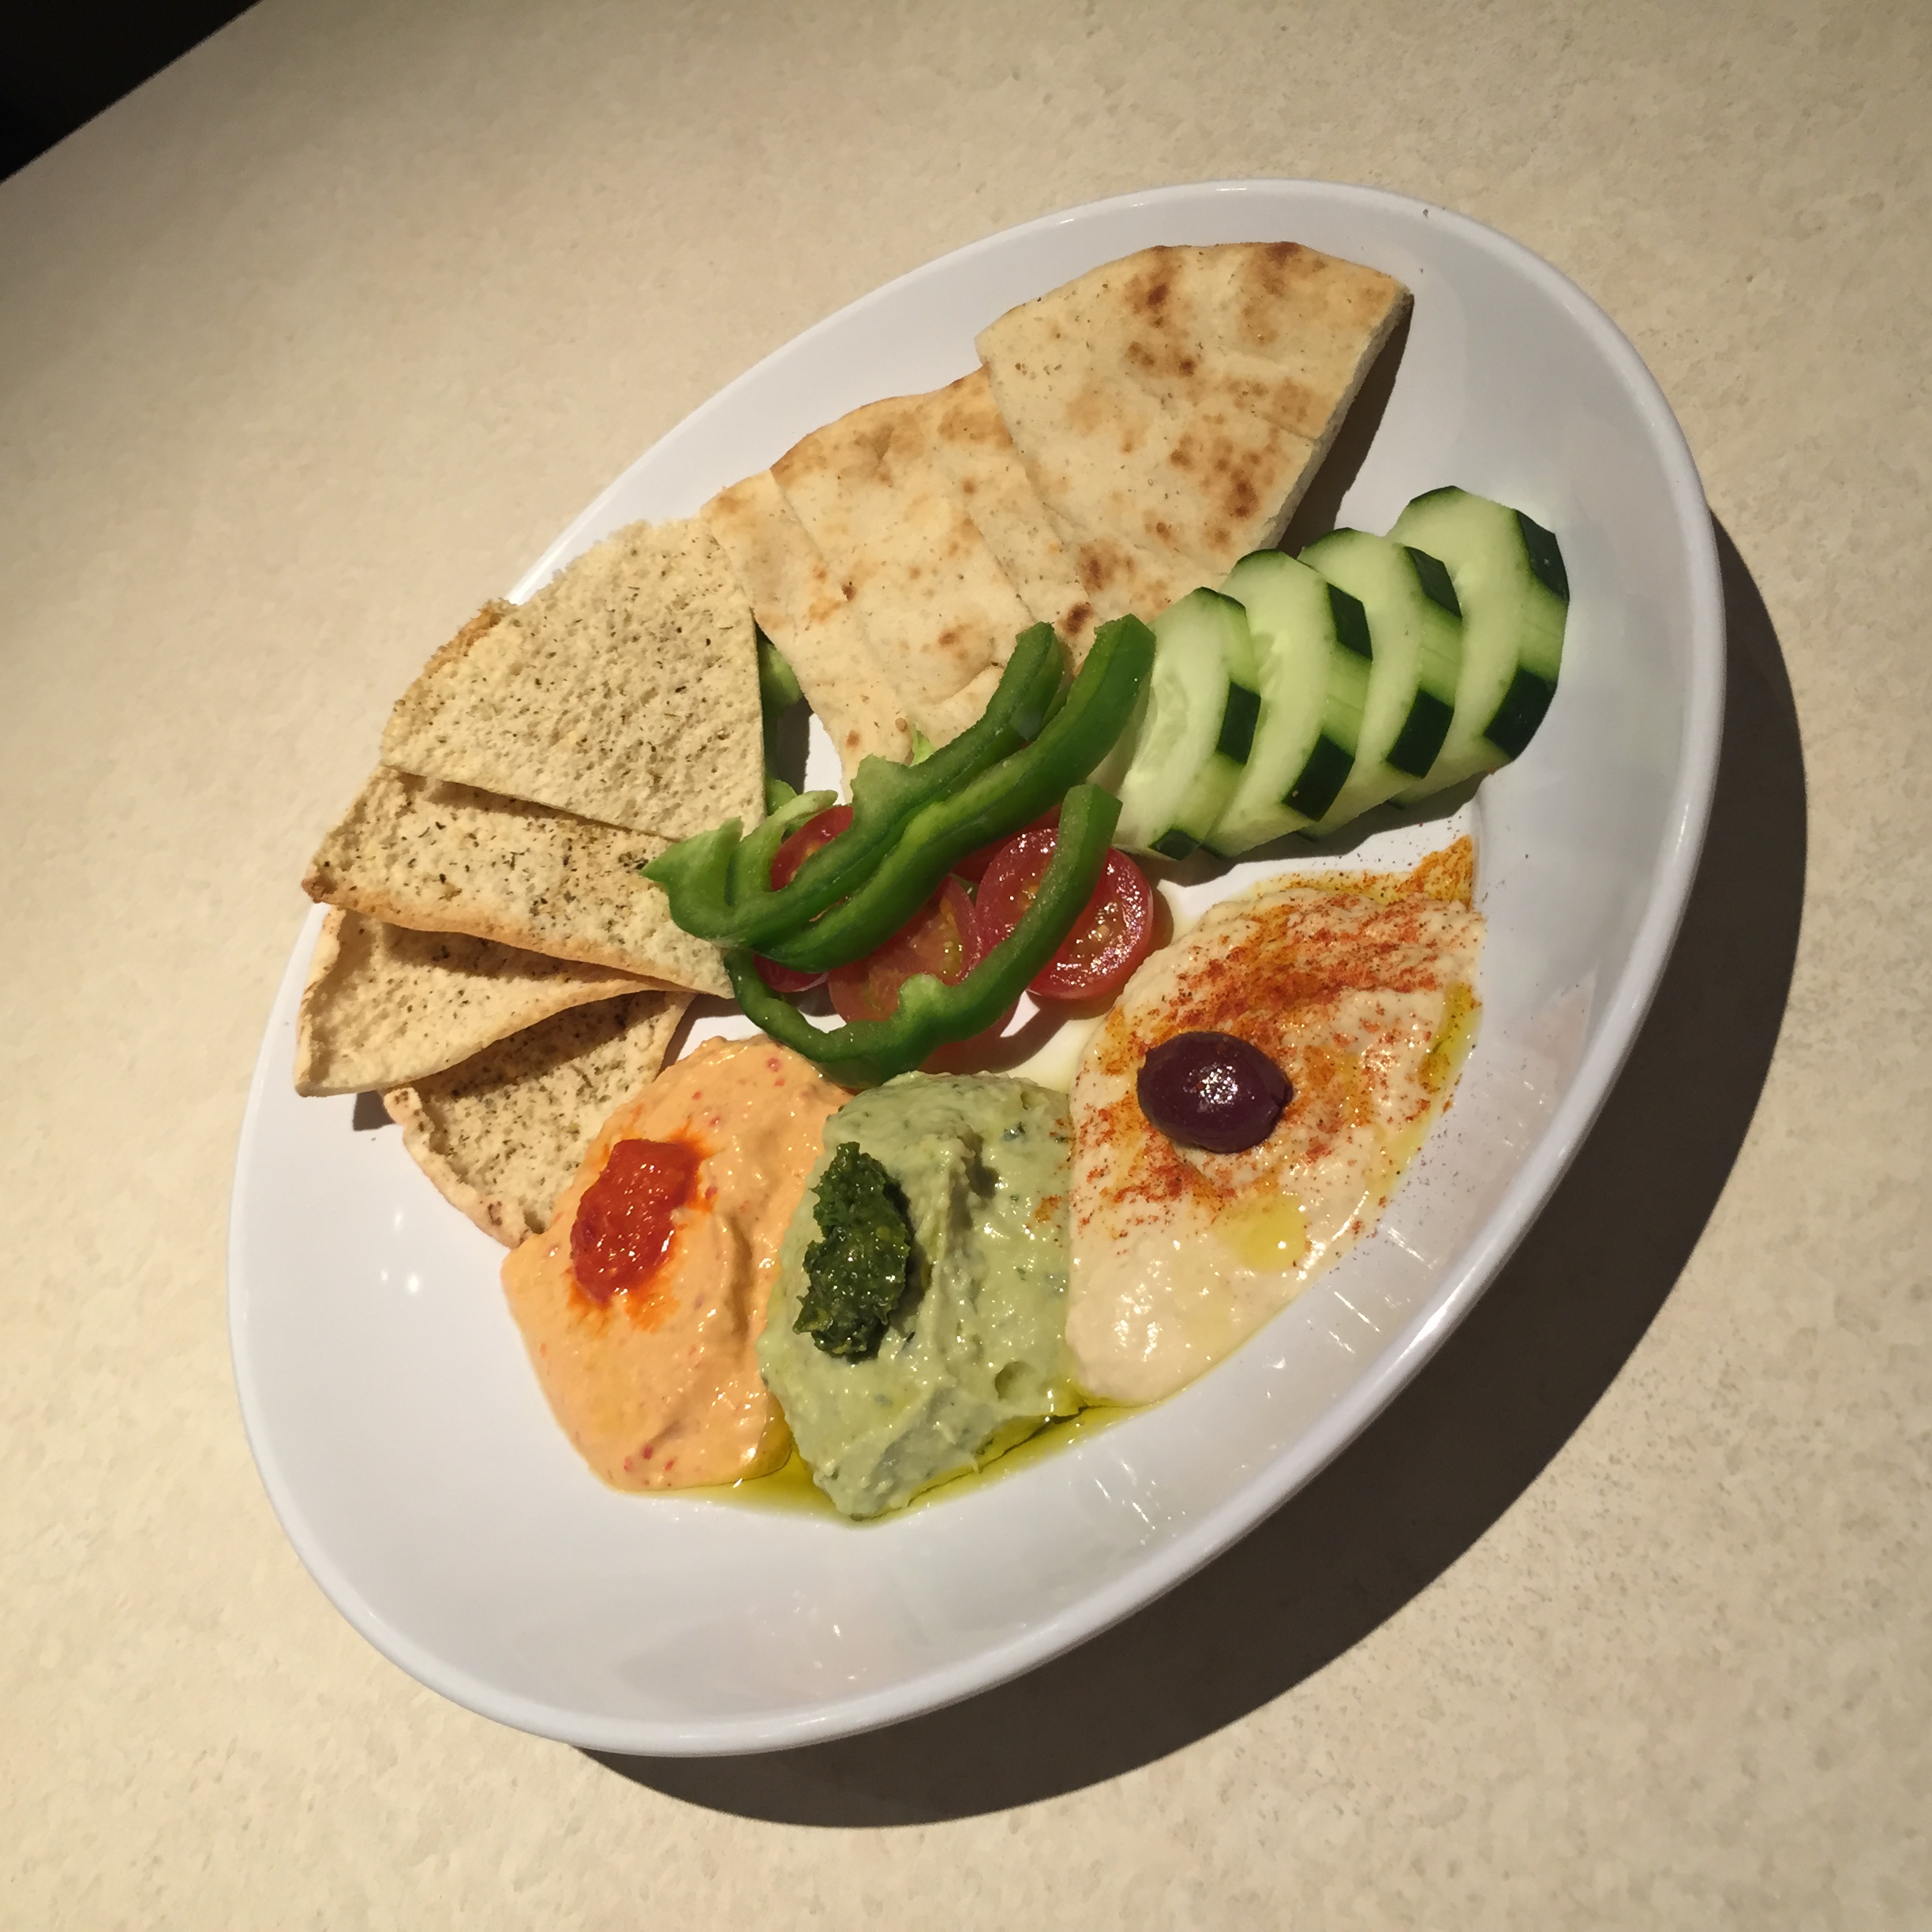 Zoes Kitchen Adds New Entree And More Hummus Options To Its Menu